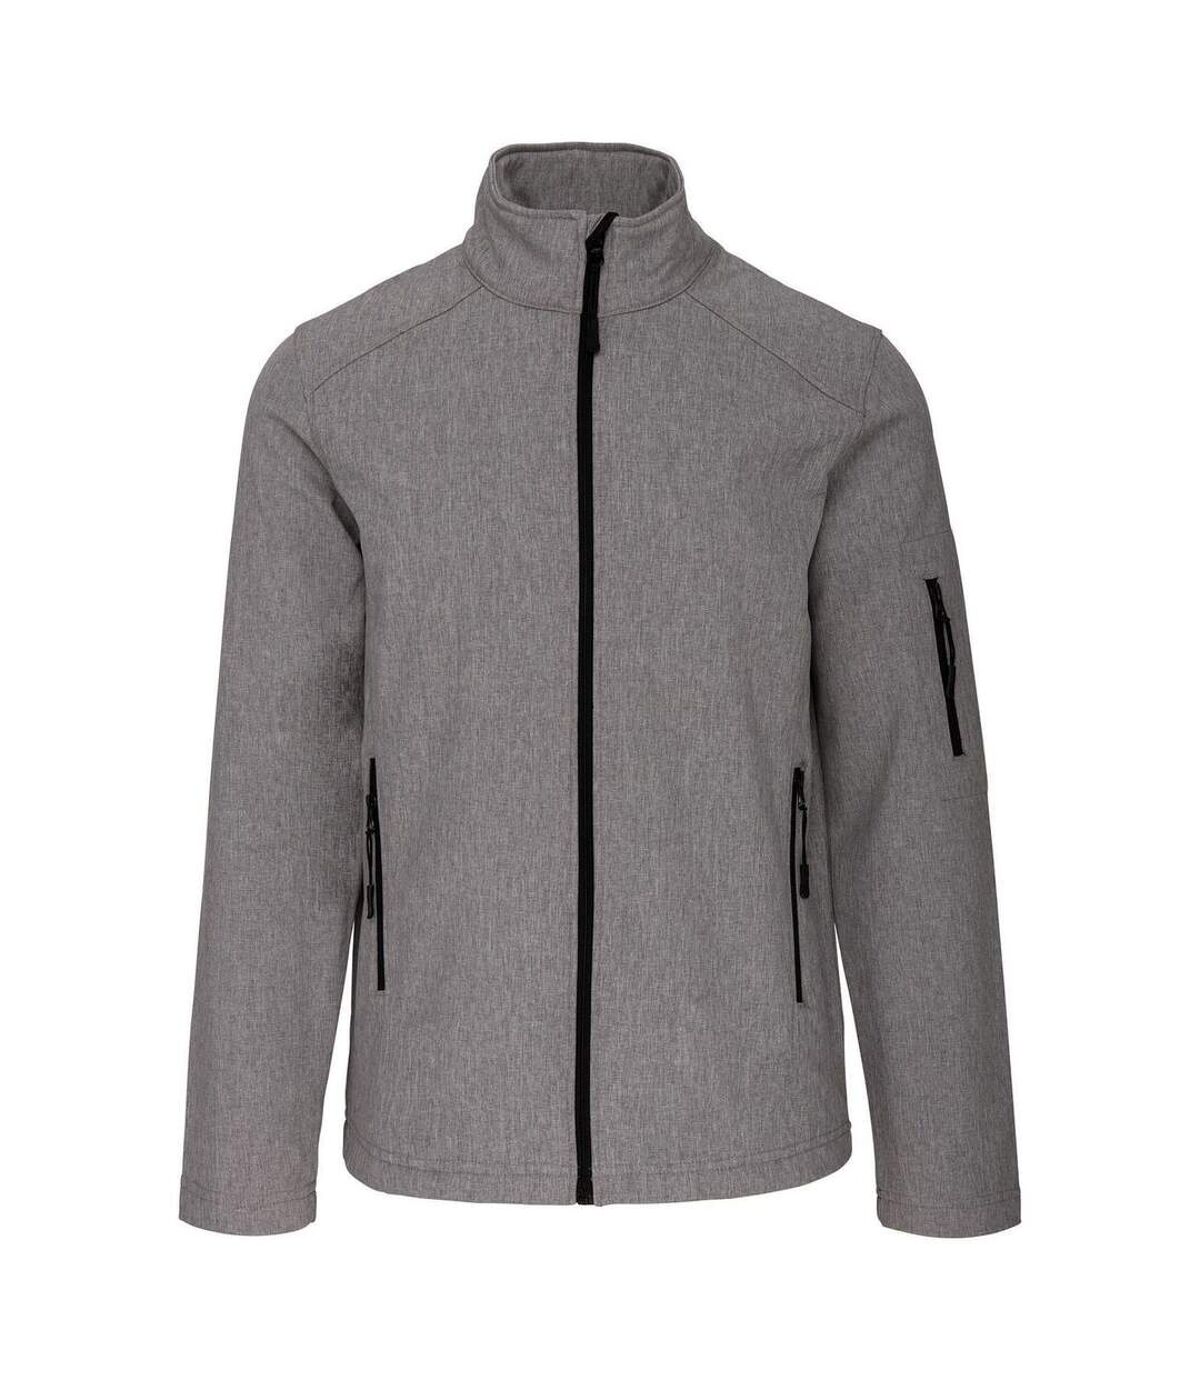 Veste softshell 3 couches - Homme - K401 - gris merle